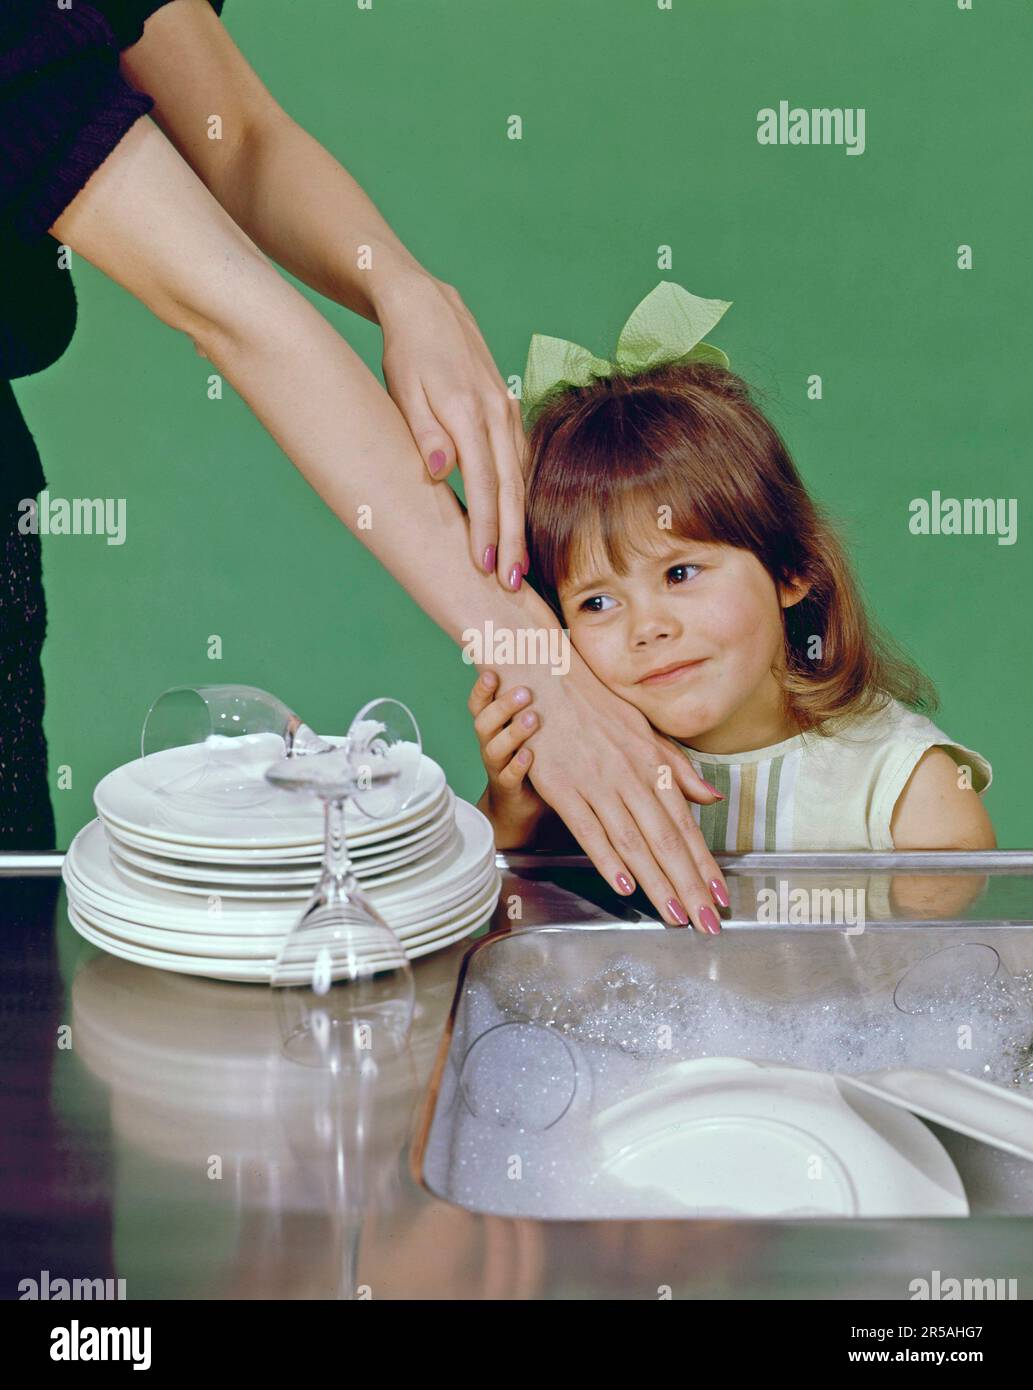 In the 1960s. A little girl pictured with her mother at a kitchen-sink, having her chin agains her mothers arm and hand, feeling the softness. Sweden 1965 Stock Photo